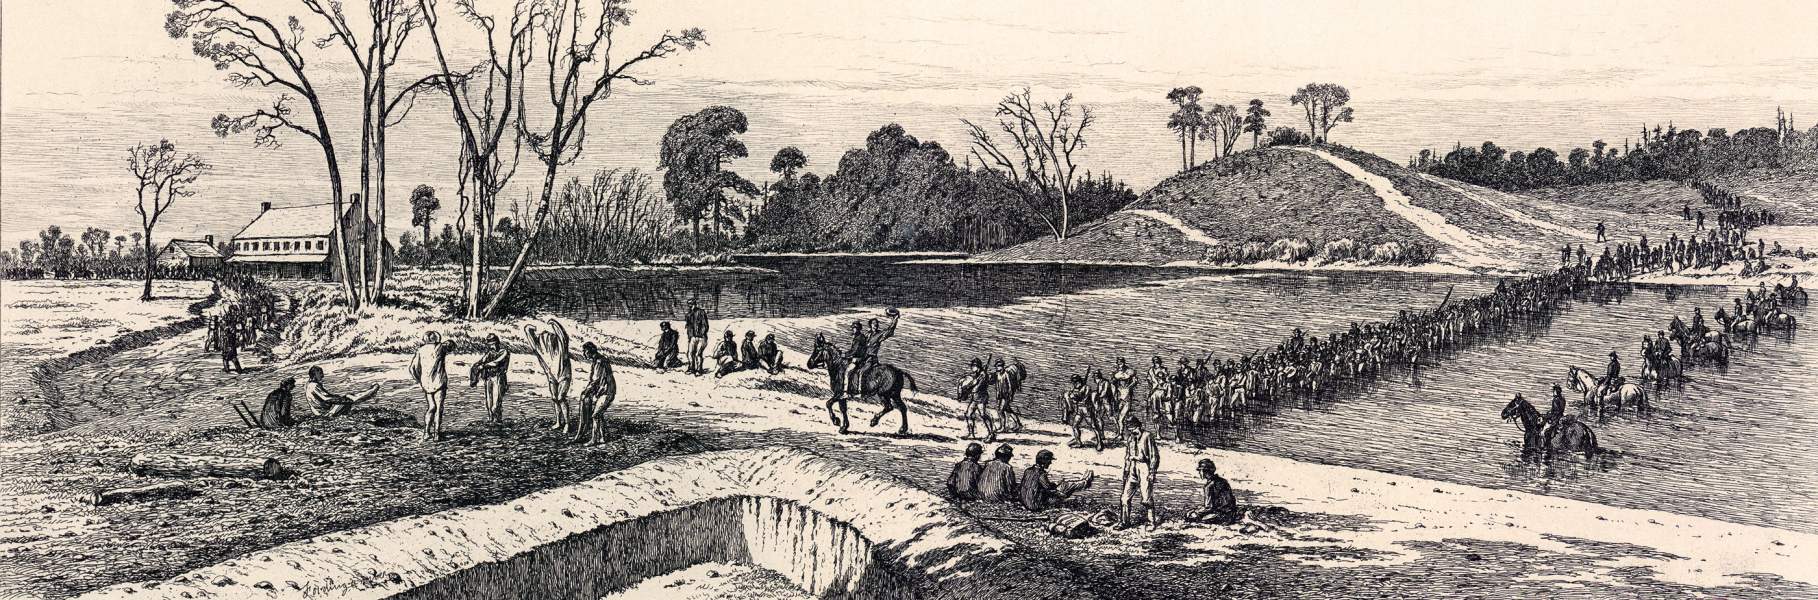 "Fording a River," Edwin Forbes, copper plate etching, 1876, zoomable image